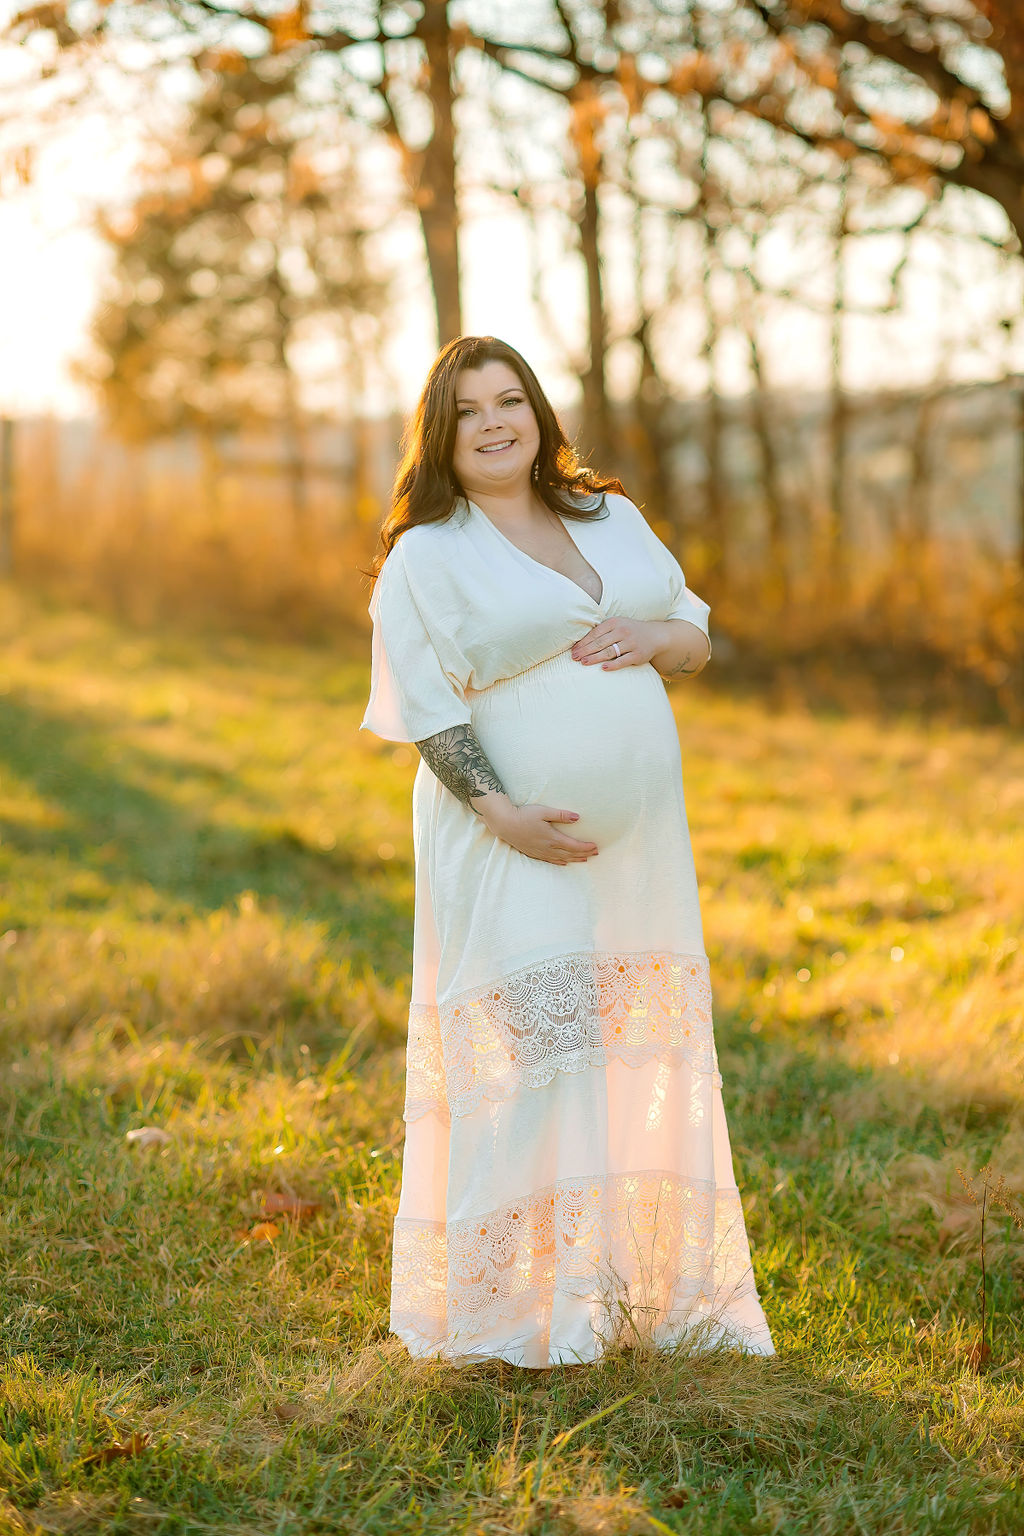 A mother to be holds her bump in a grassy field at sunset in a white maternity dress with a lace bottom prenatal yoga winchester va